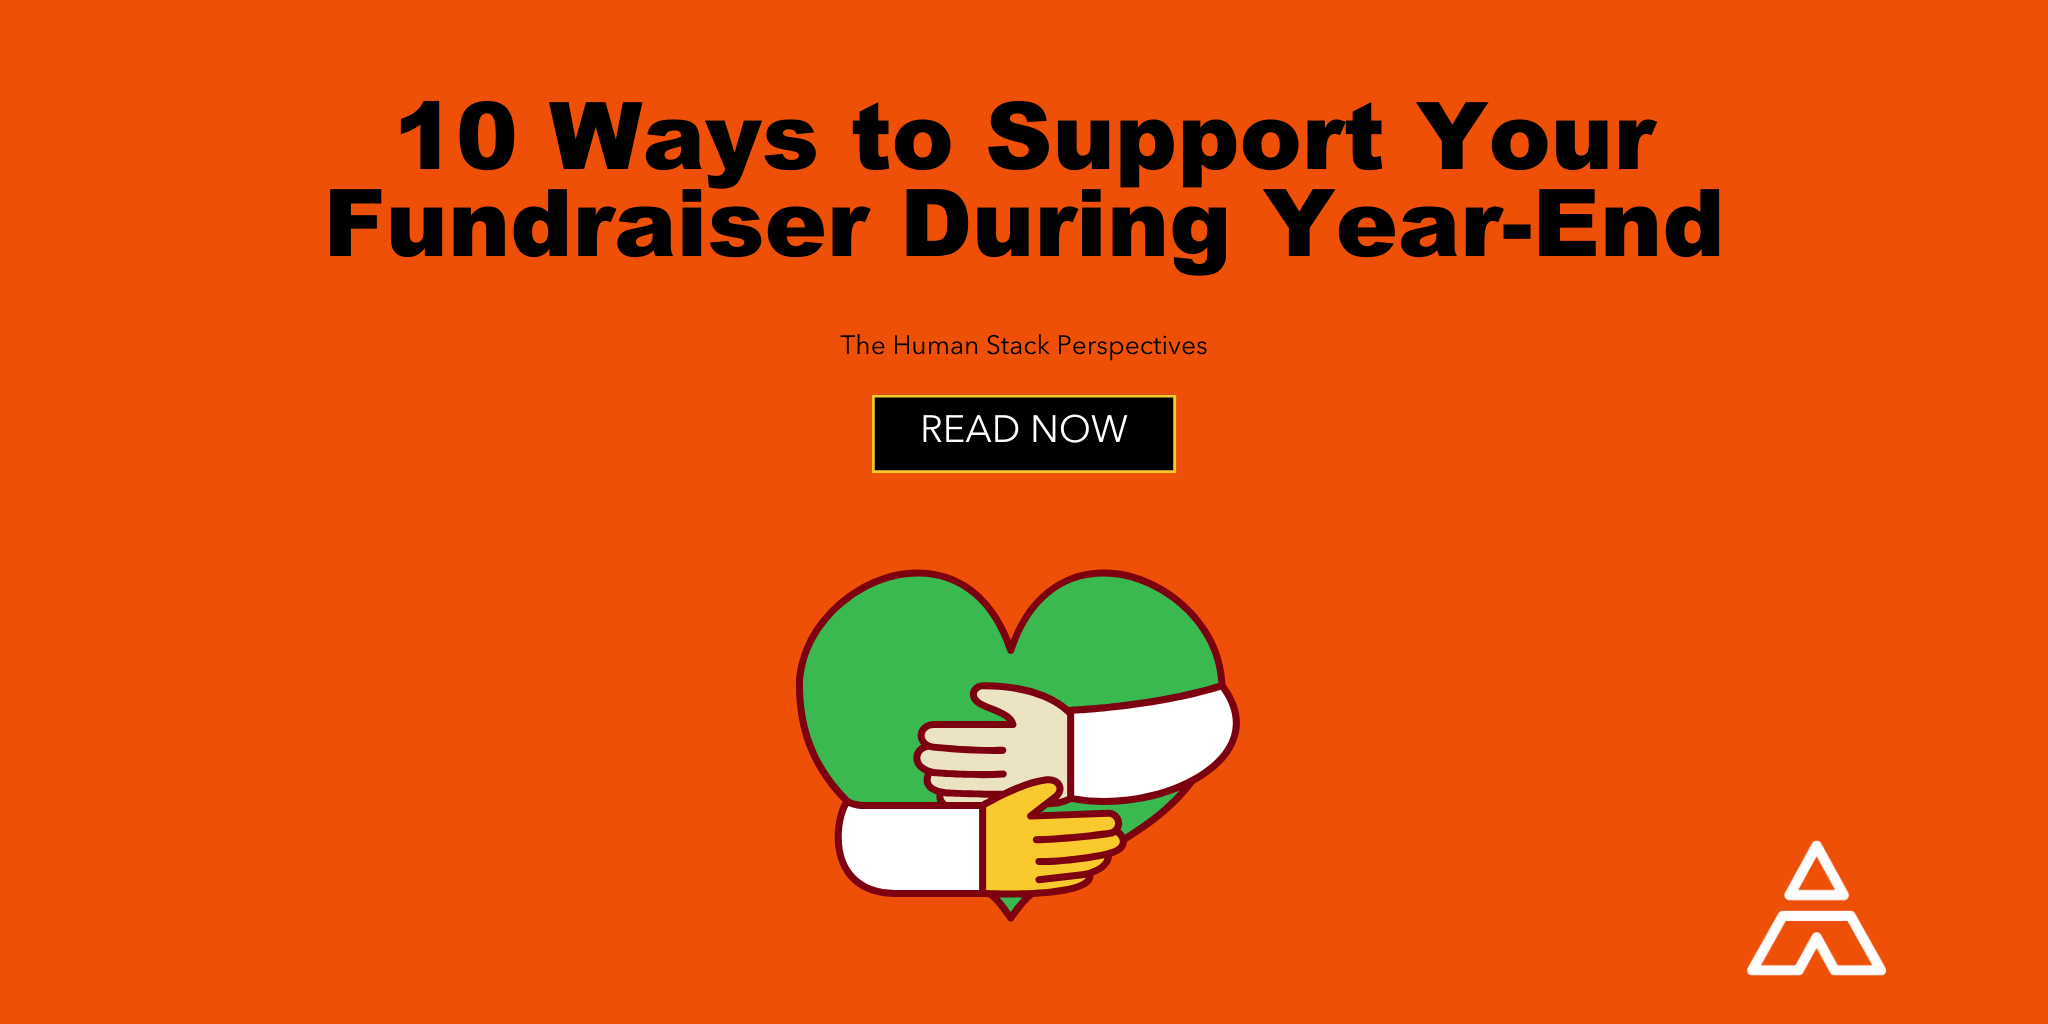 10 Ways to Support Your Fundraiser During Year-End